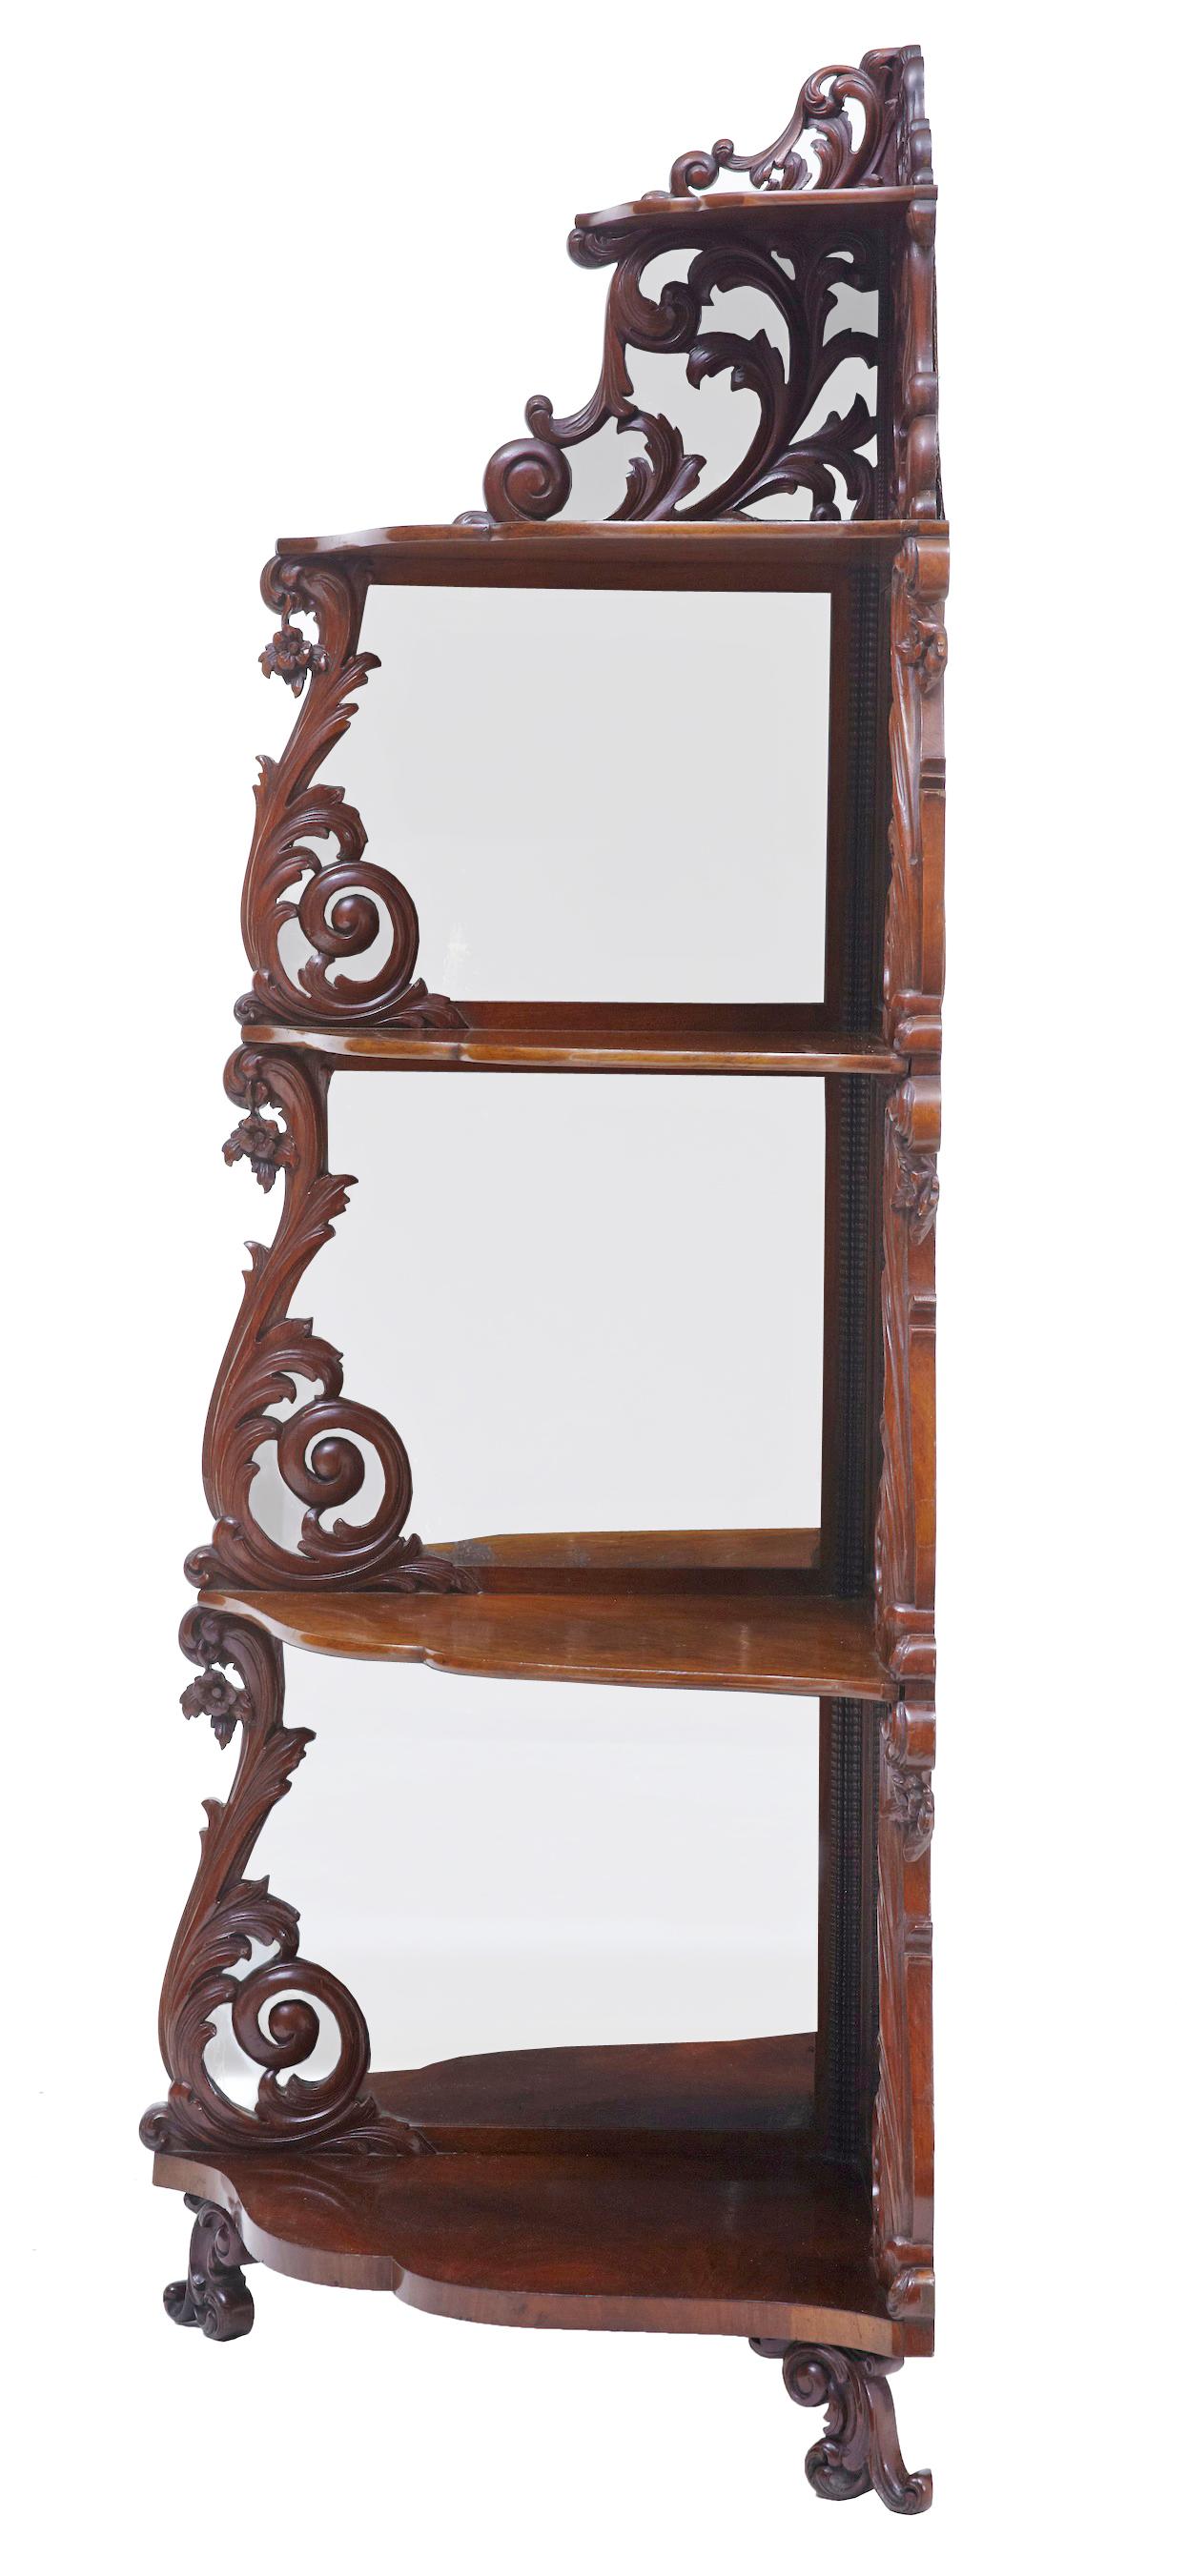 19th century carved mahogany Victorian mirrored whatnot circa 1890.

Ornate 5 tier corner whatnot made in mahogany. Each level decorated with pierced carved scrolls with mirrored backs behind the carving.

Standing on petit scrolled